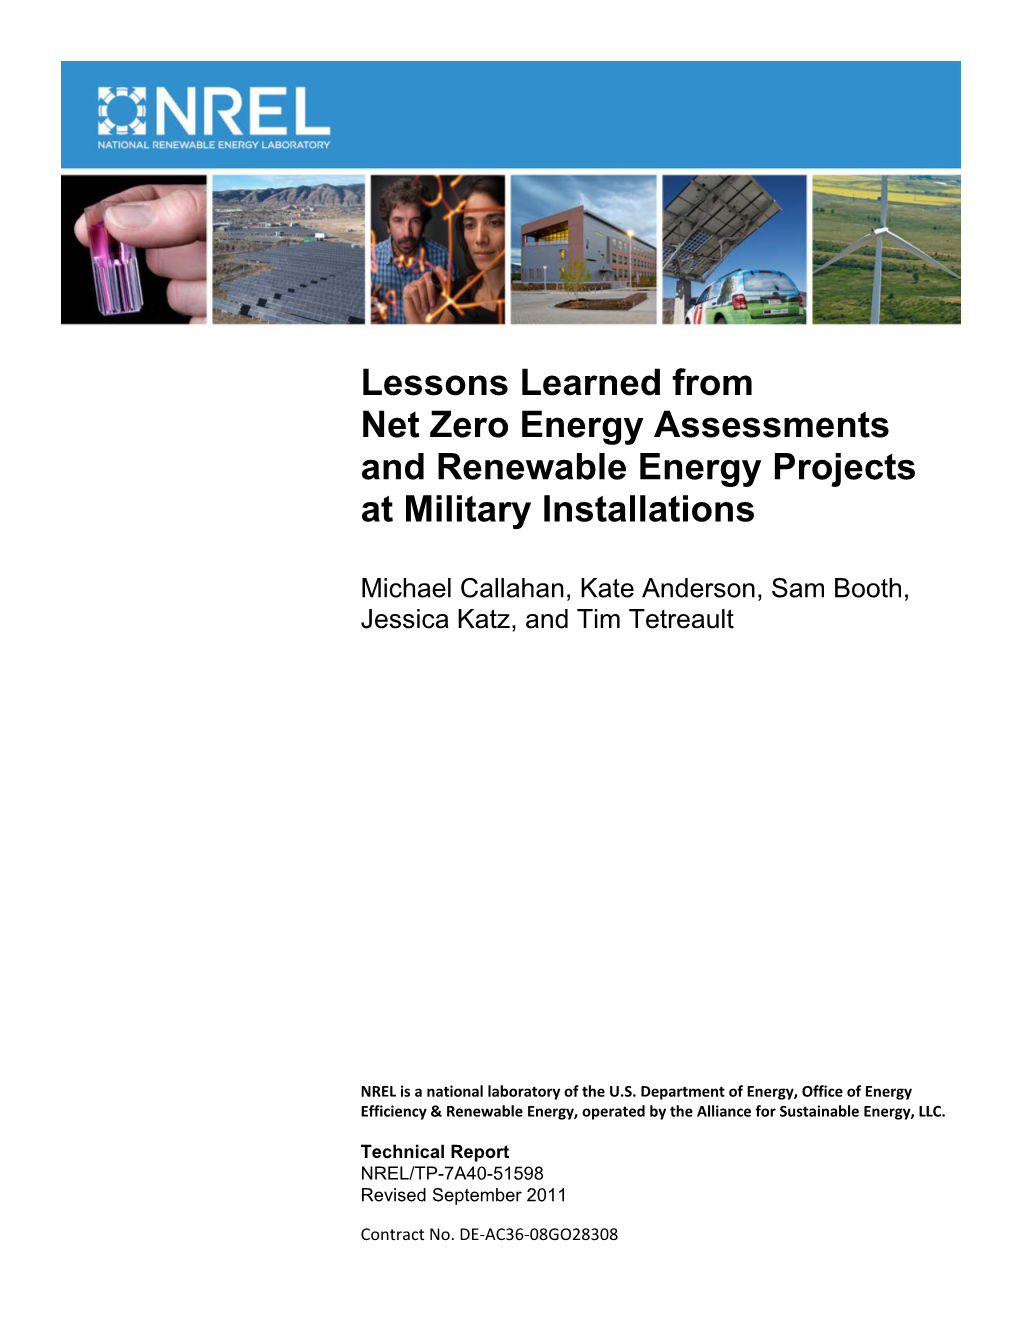 Learned from Net Zero Energy Assessments and Renewable Energy Projects at Military Installations